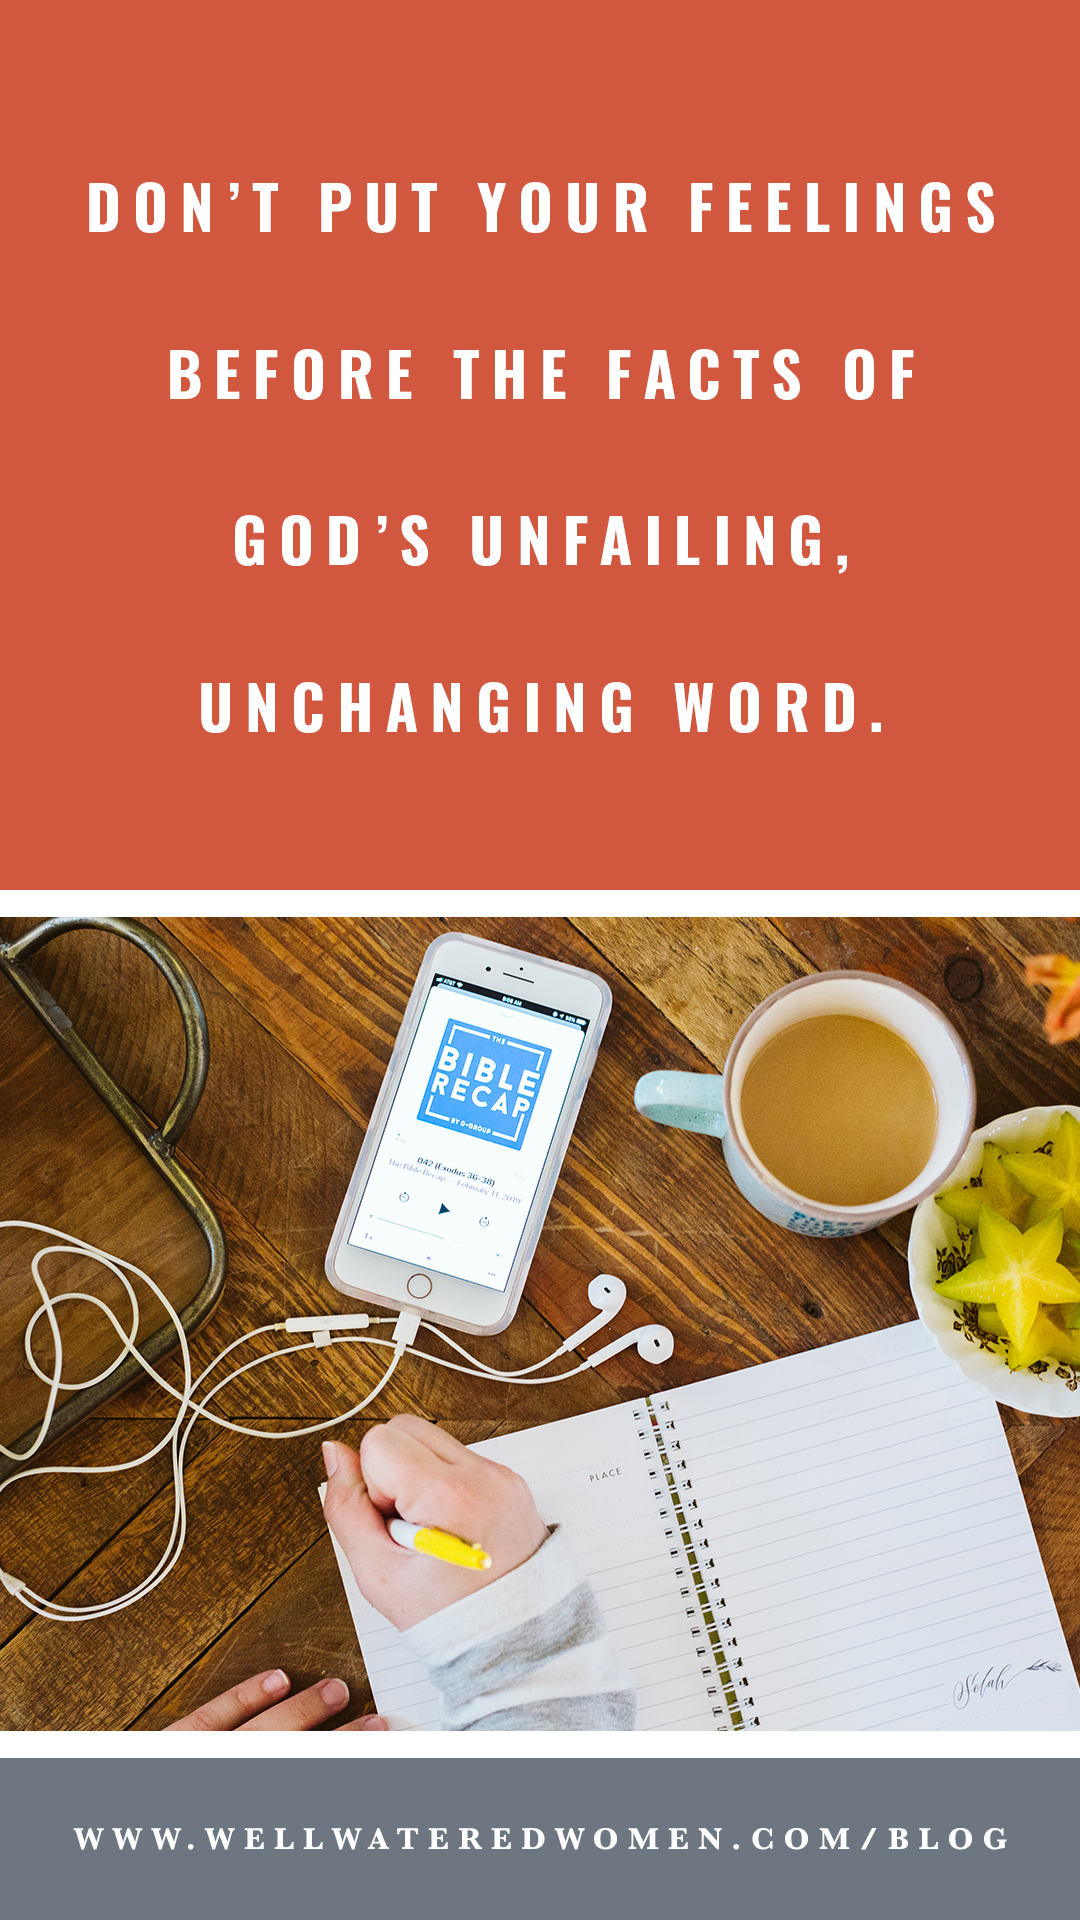 Don't Put Your Feelings Before the Unchanging Word of God